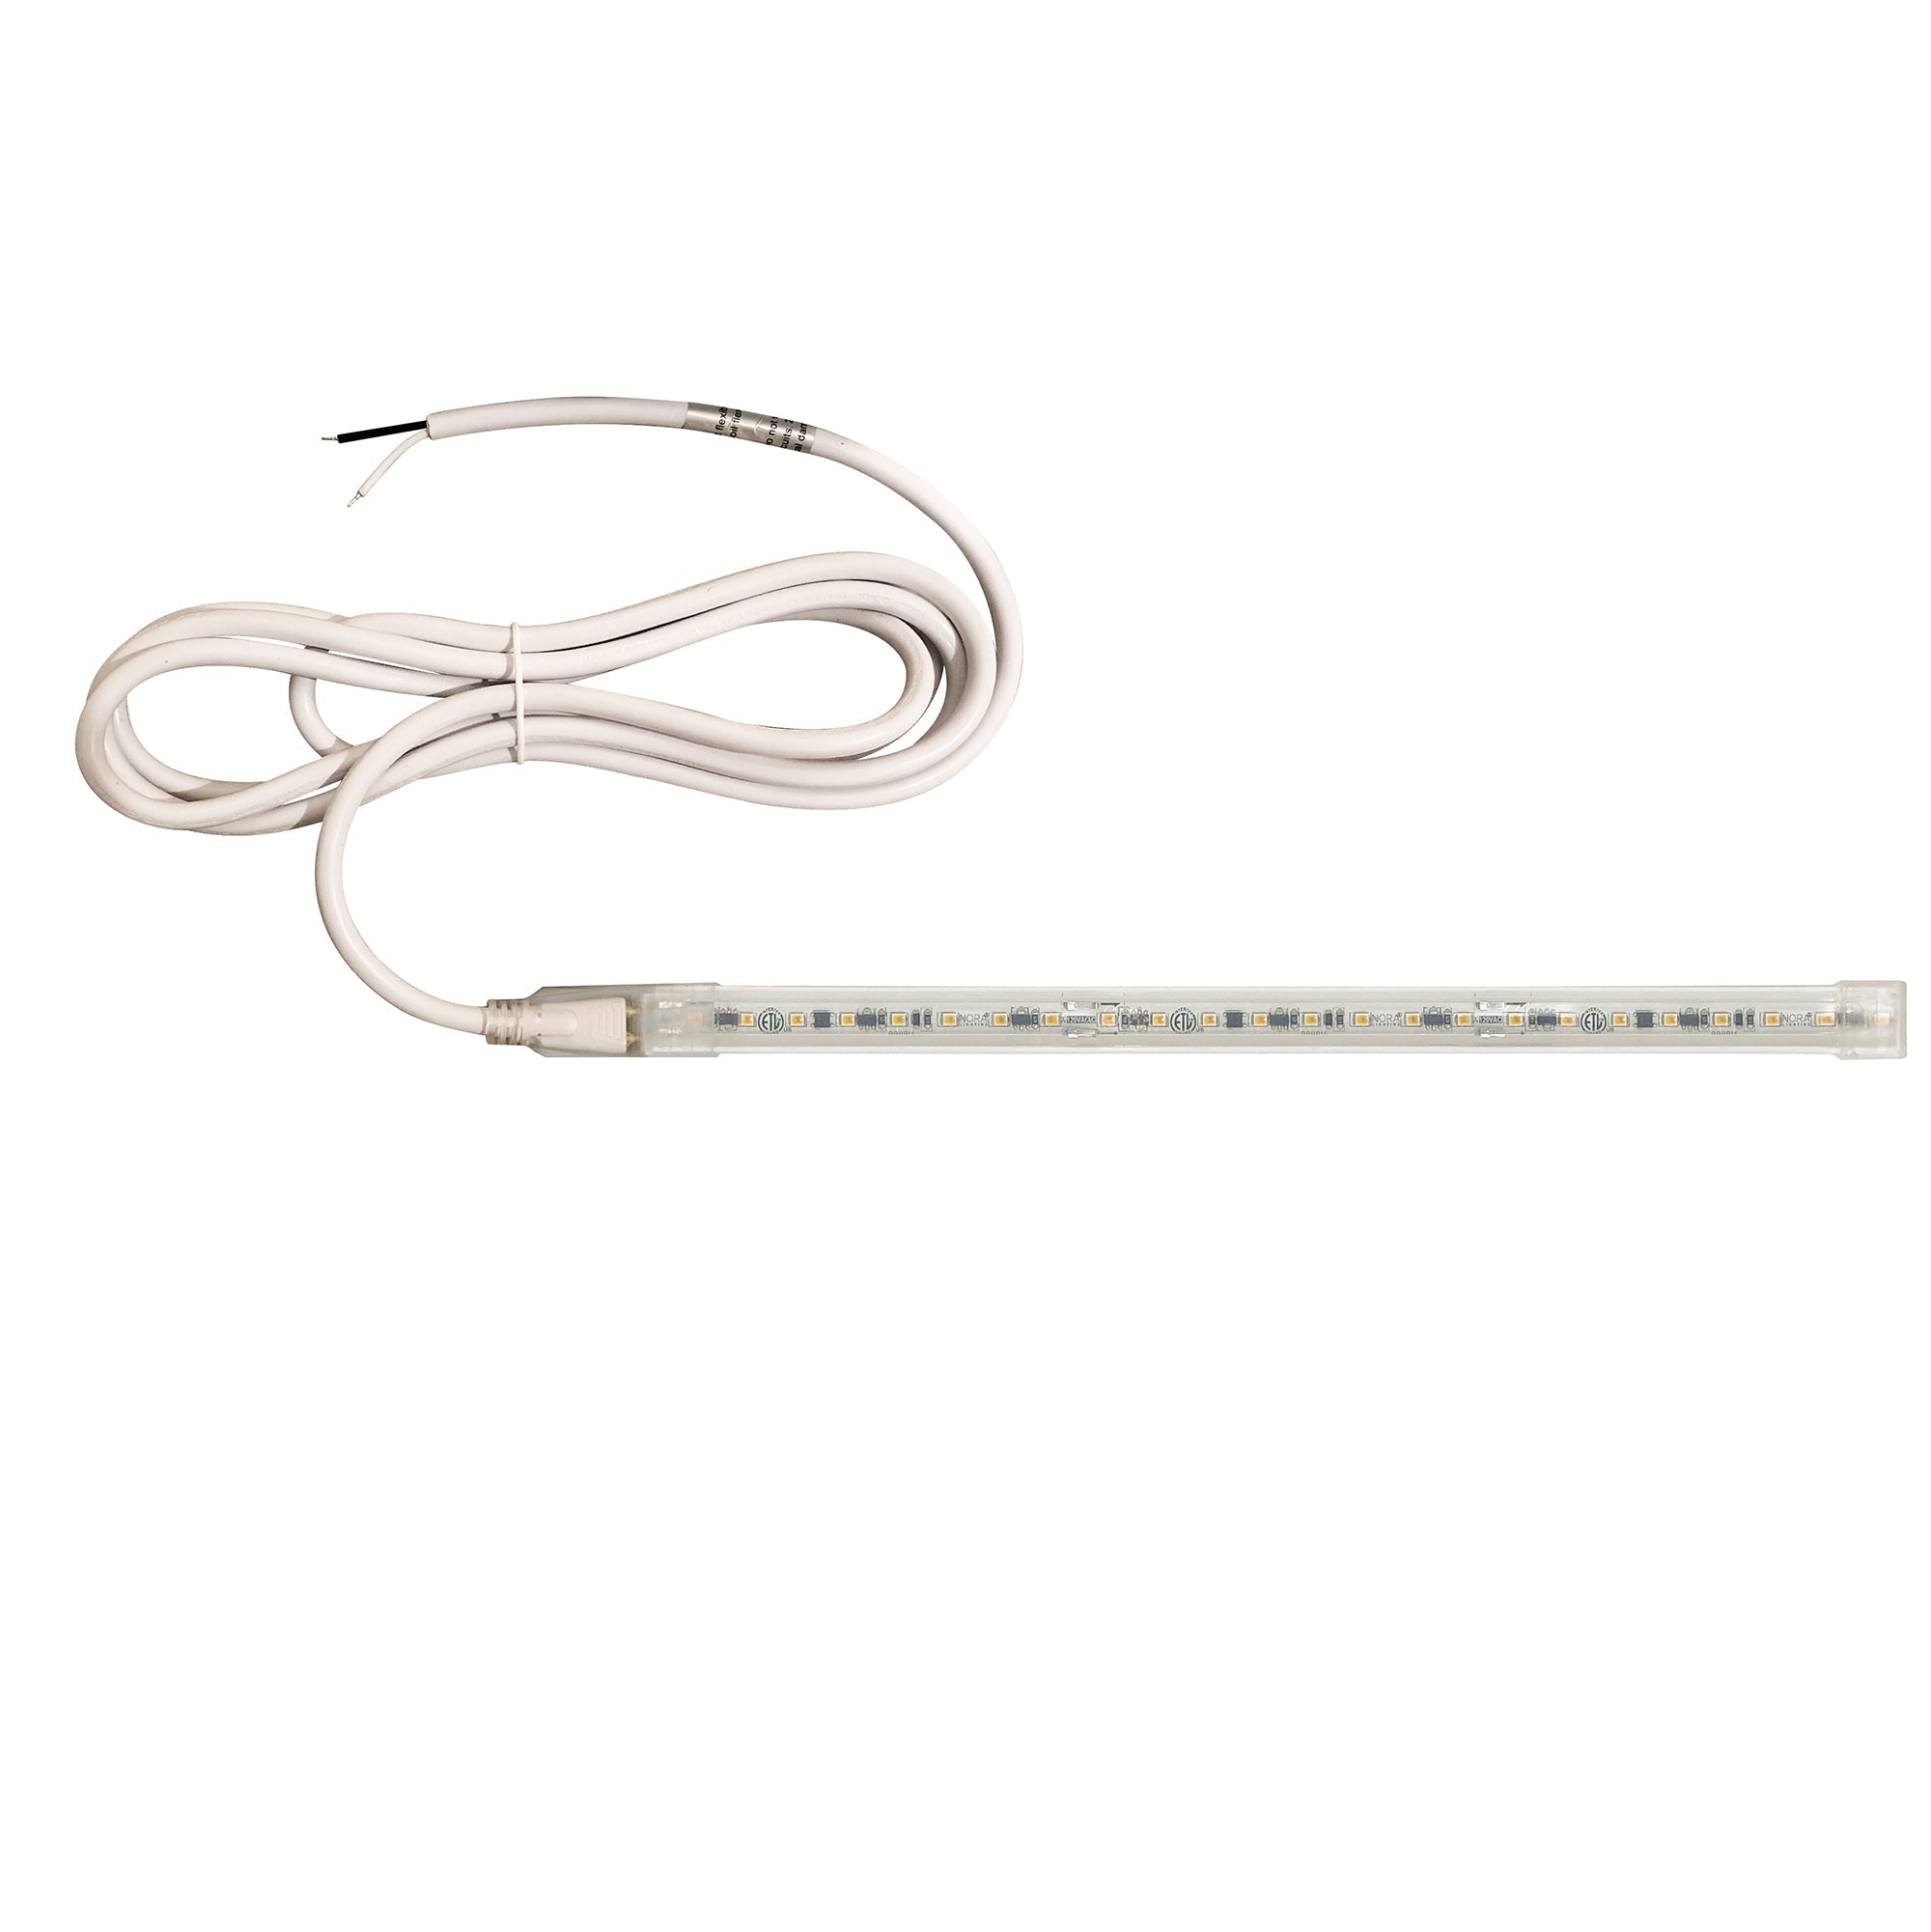 Nora Lighting NUTP13-W62-4-12-930/HW - Accent / Undercabinet - Custom Cut 62-ft, 4-in 120V Continuous LED Tape Light, 330lm / 3.6W per foot, 3000K, w/ Mounting Clips and 8' Hardwired Power Cord